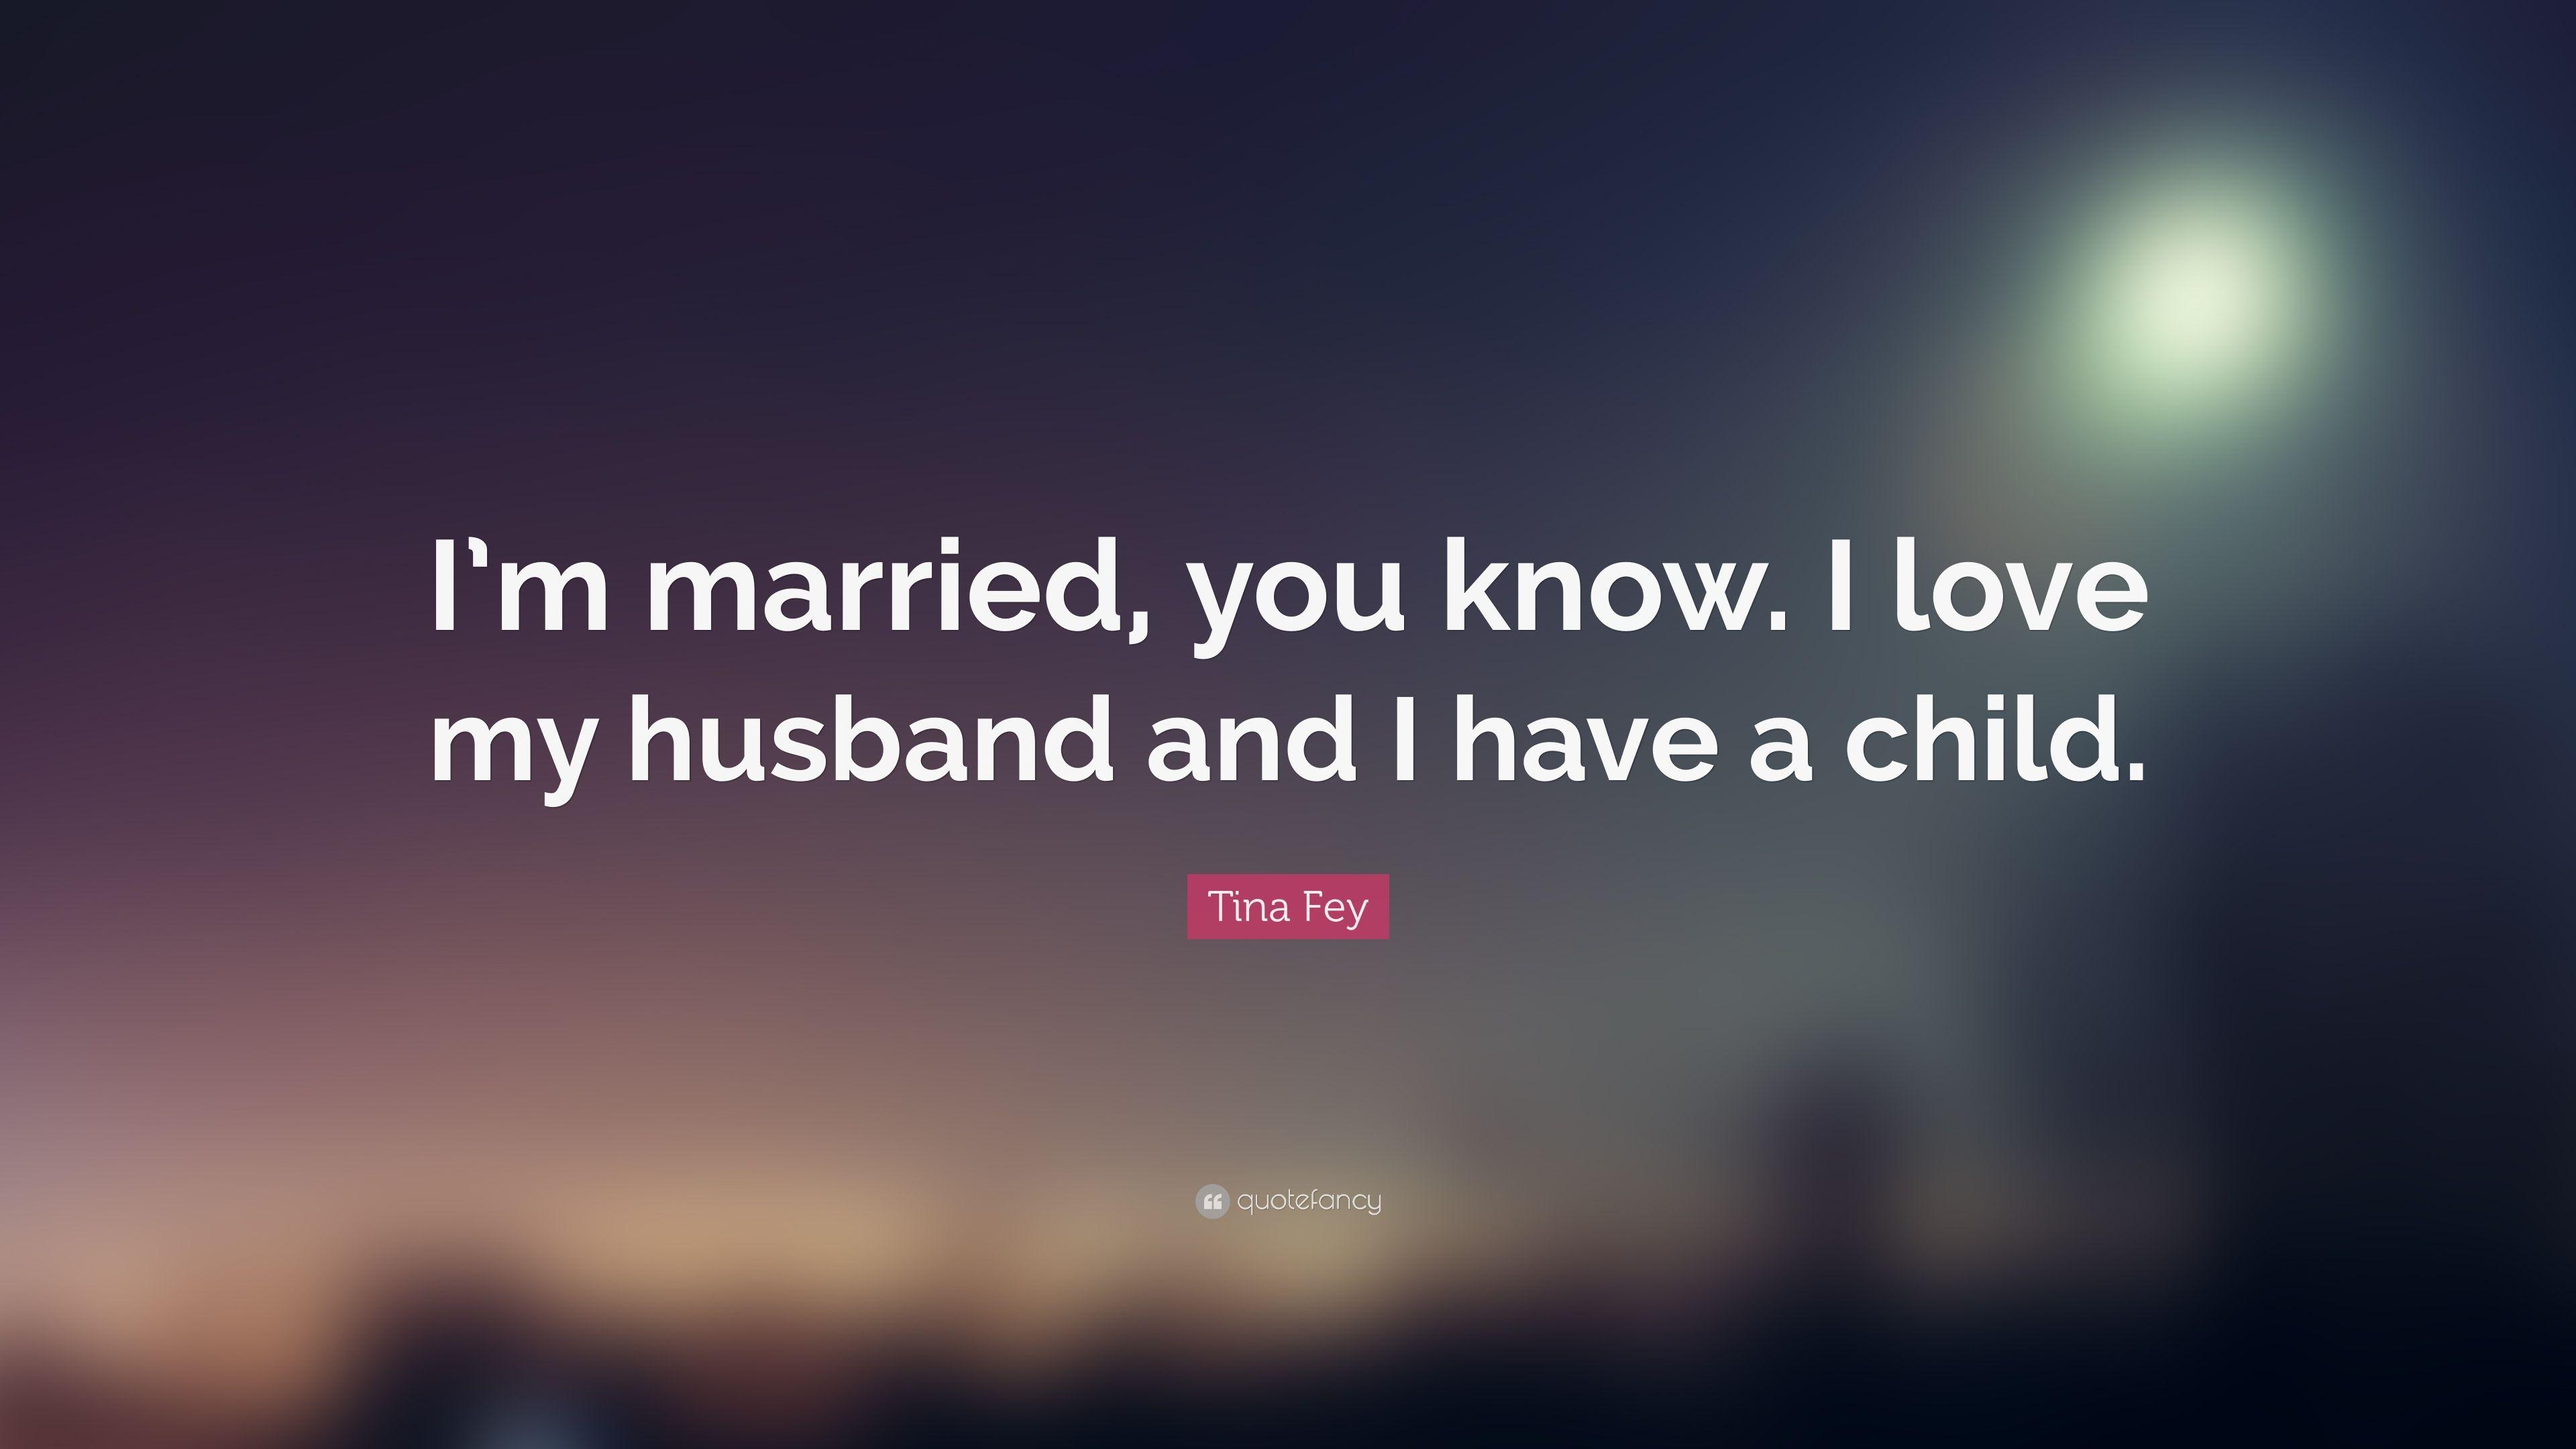 Tina Fey Quote: “I&;m married, you know. I love my husband and I